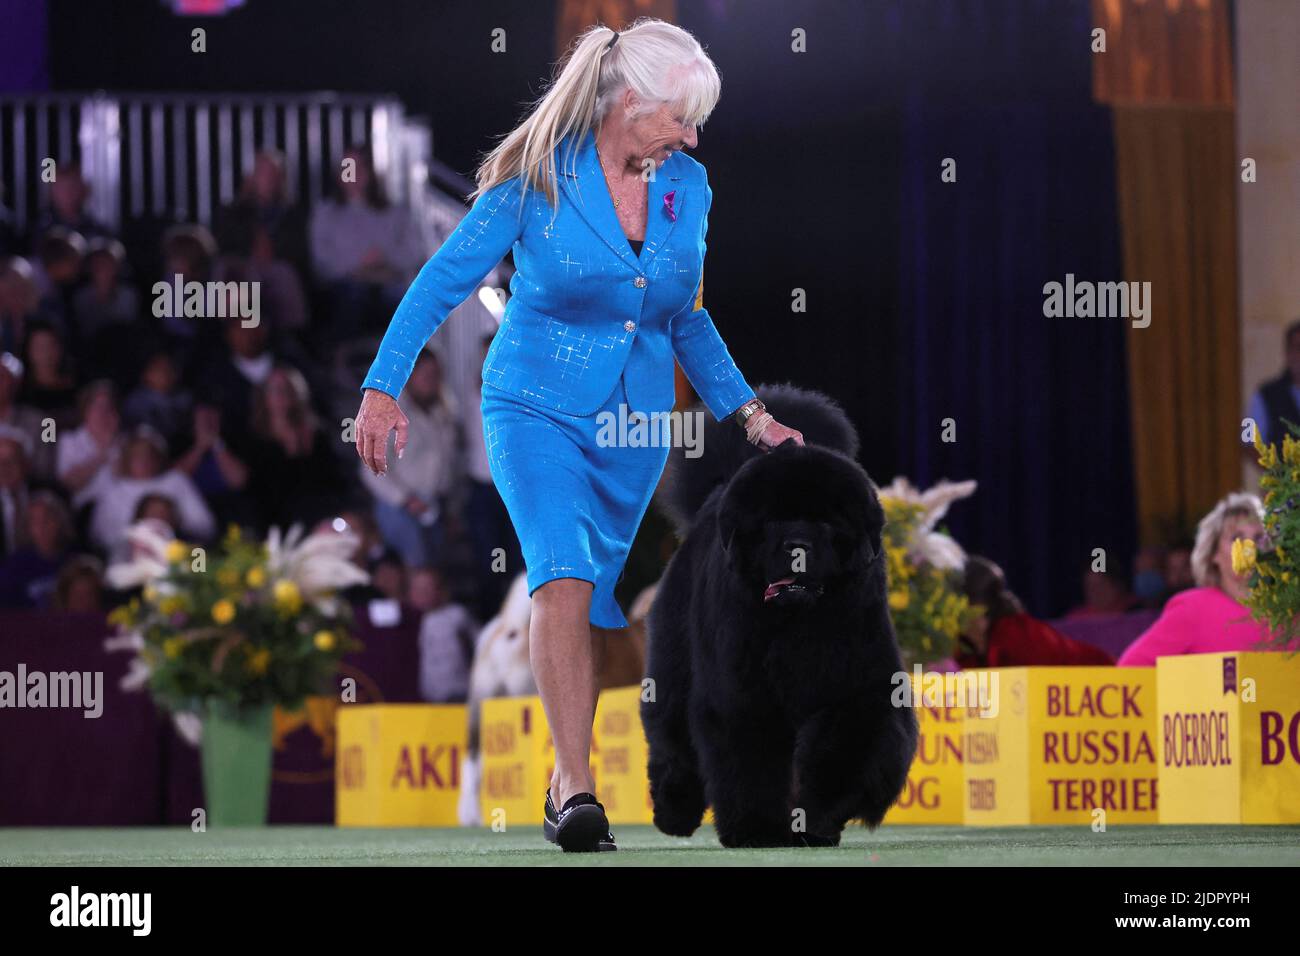 A handler runs a Newfoundland dog during judging in the Working Group at the 146th Westminster Kennel Club Dog Show at the Lyndhurst Estate in Tarrytown, New York, U.S., June 22, 2022. REUTERS/Mike Segar Stock Photo